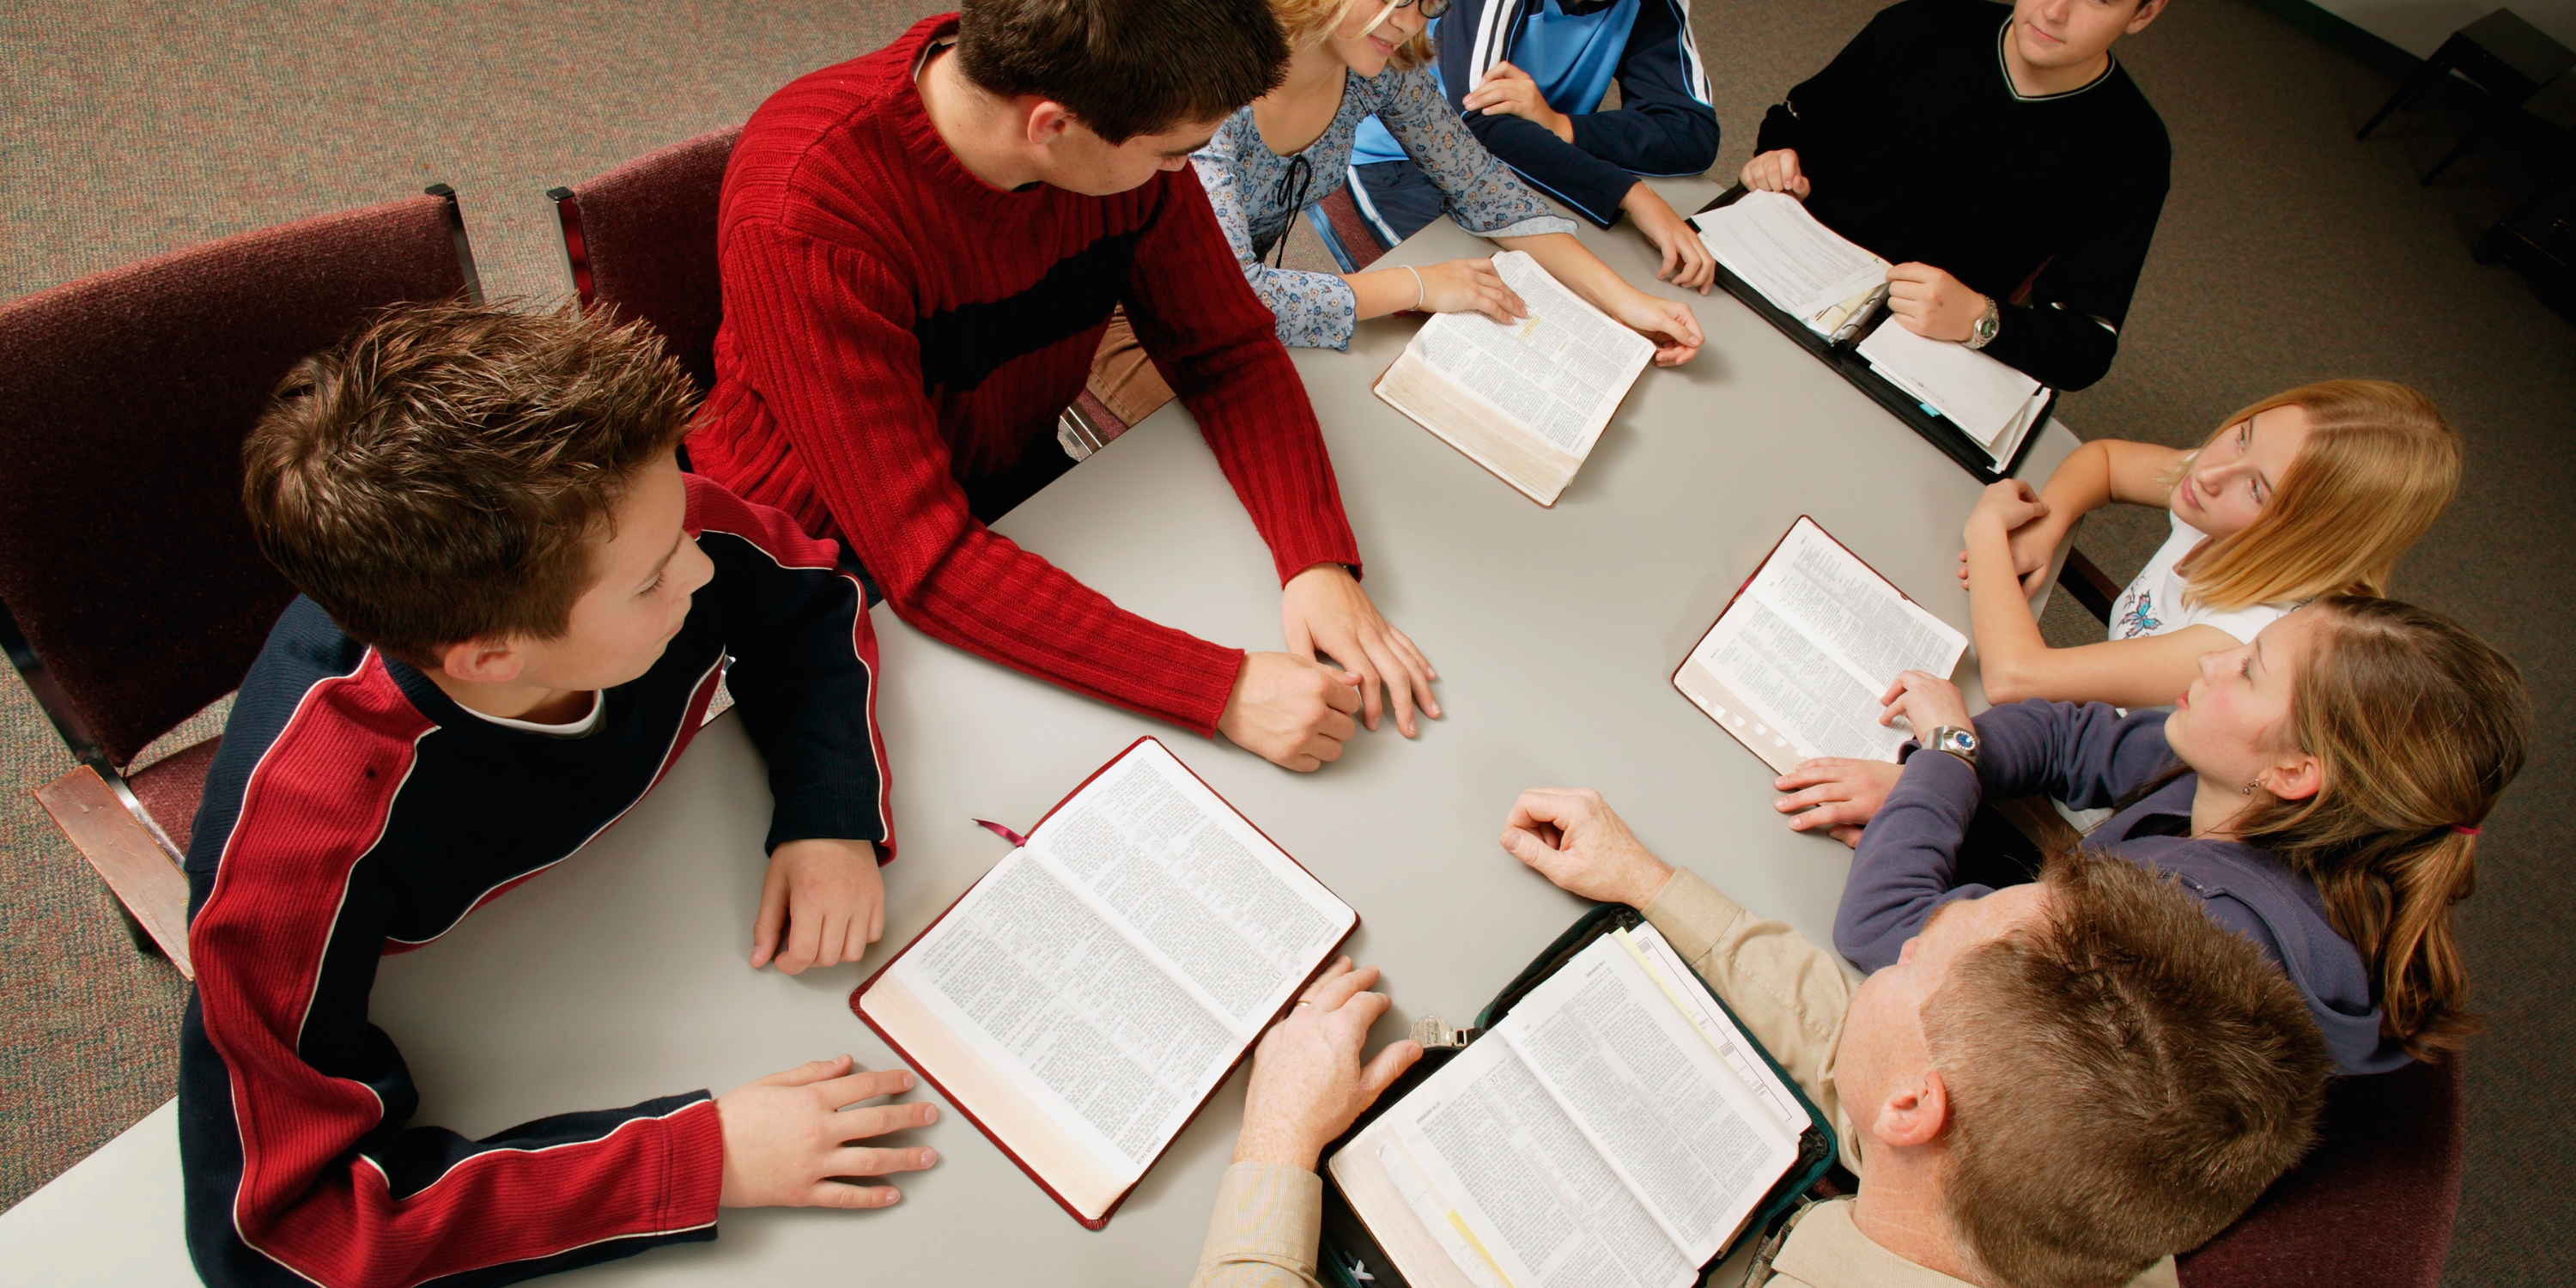 A group of young people gathered for Bible study